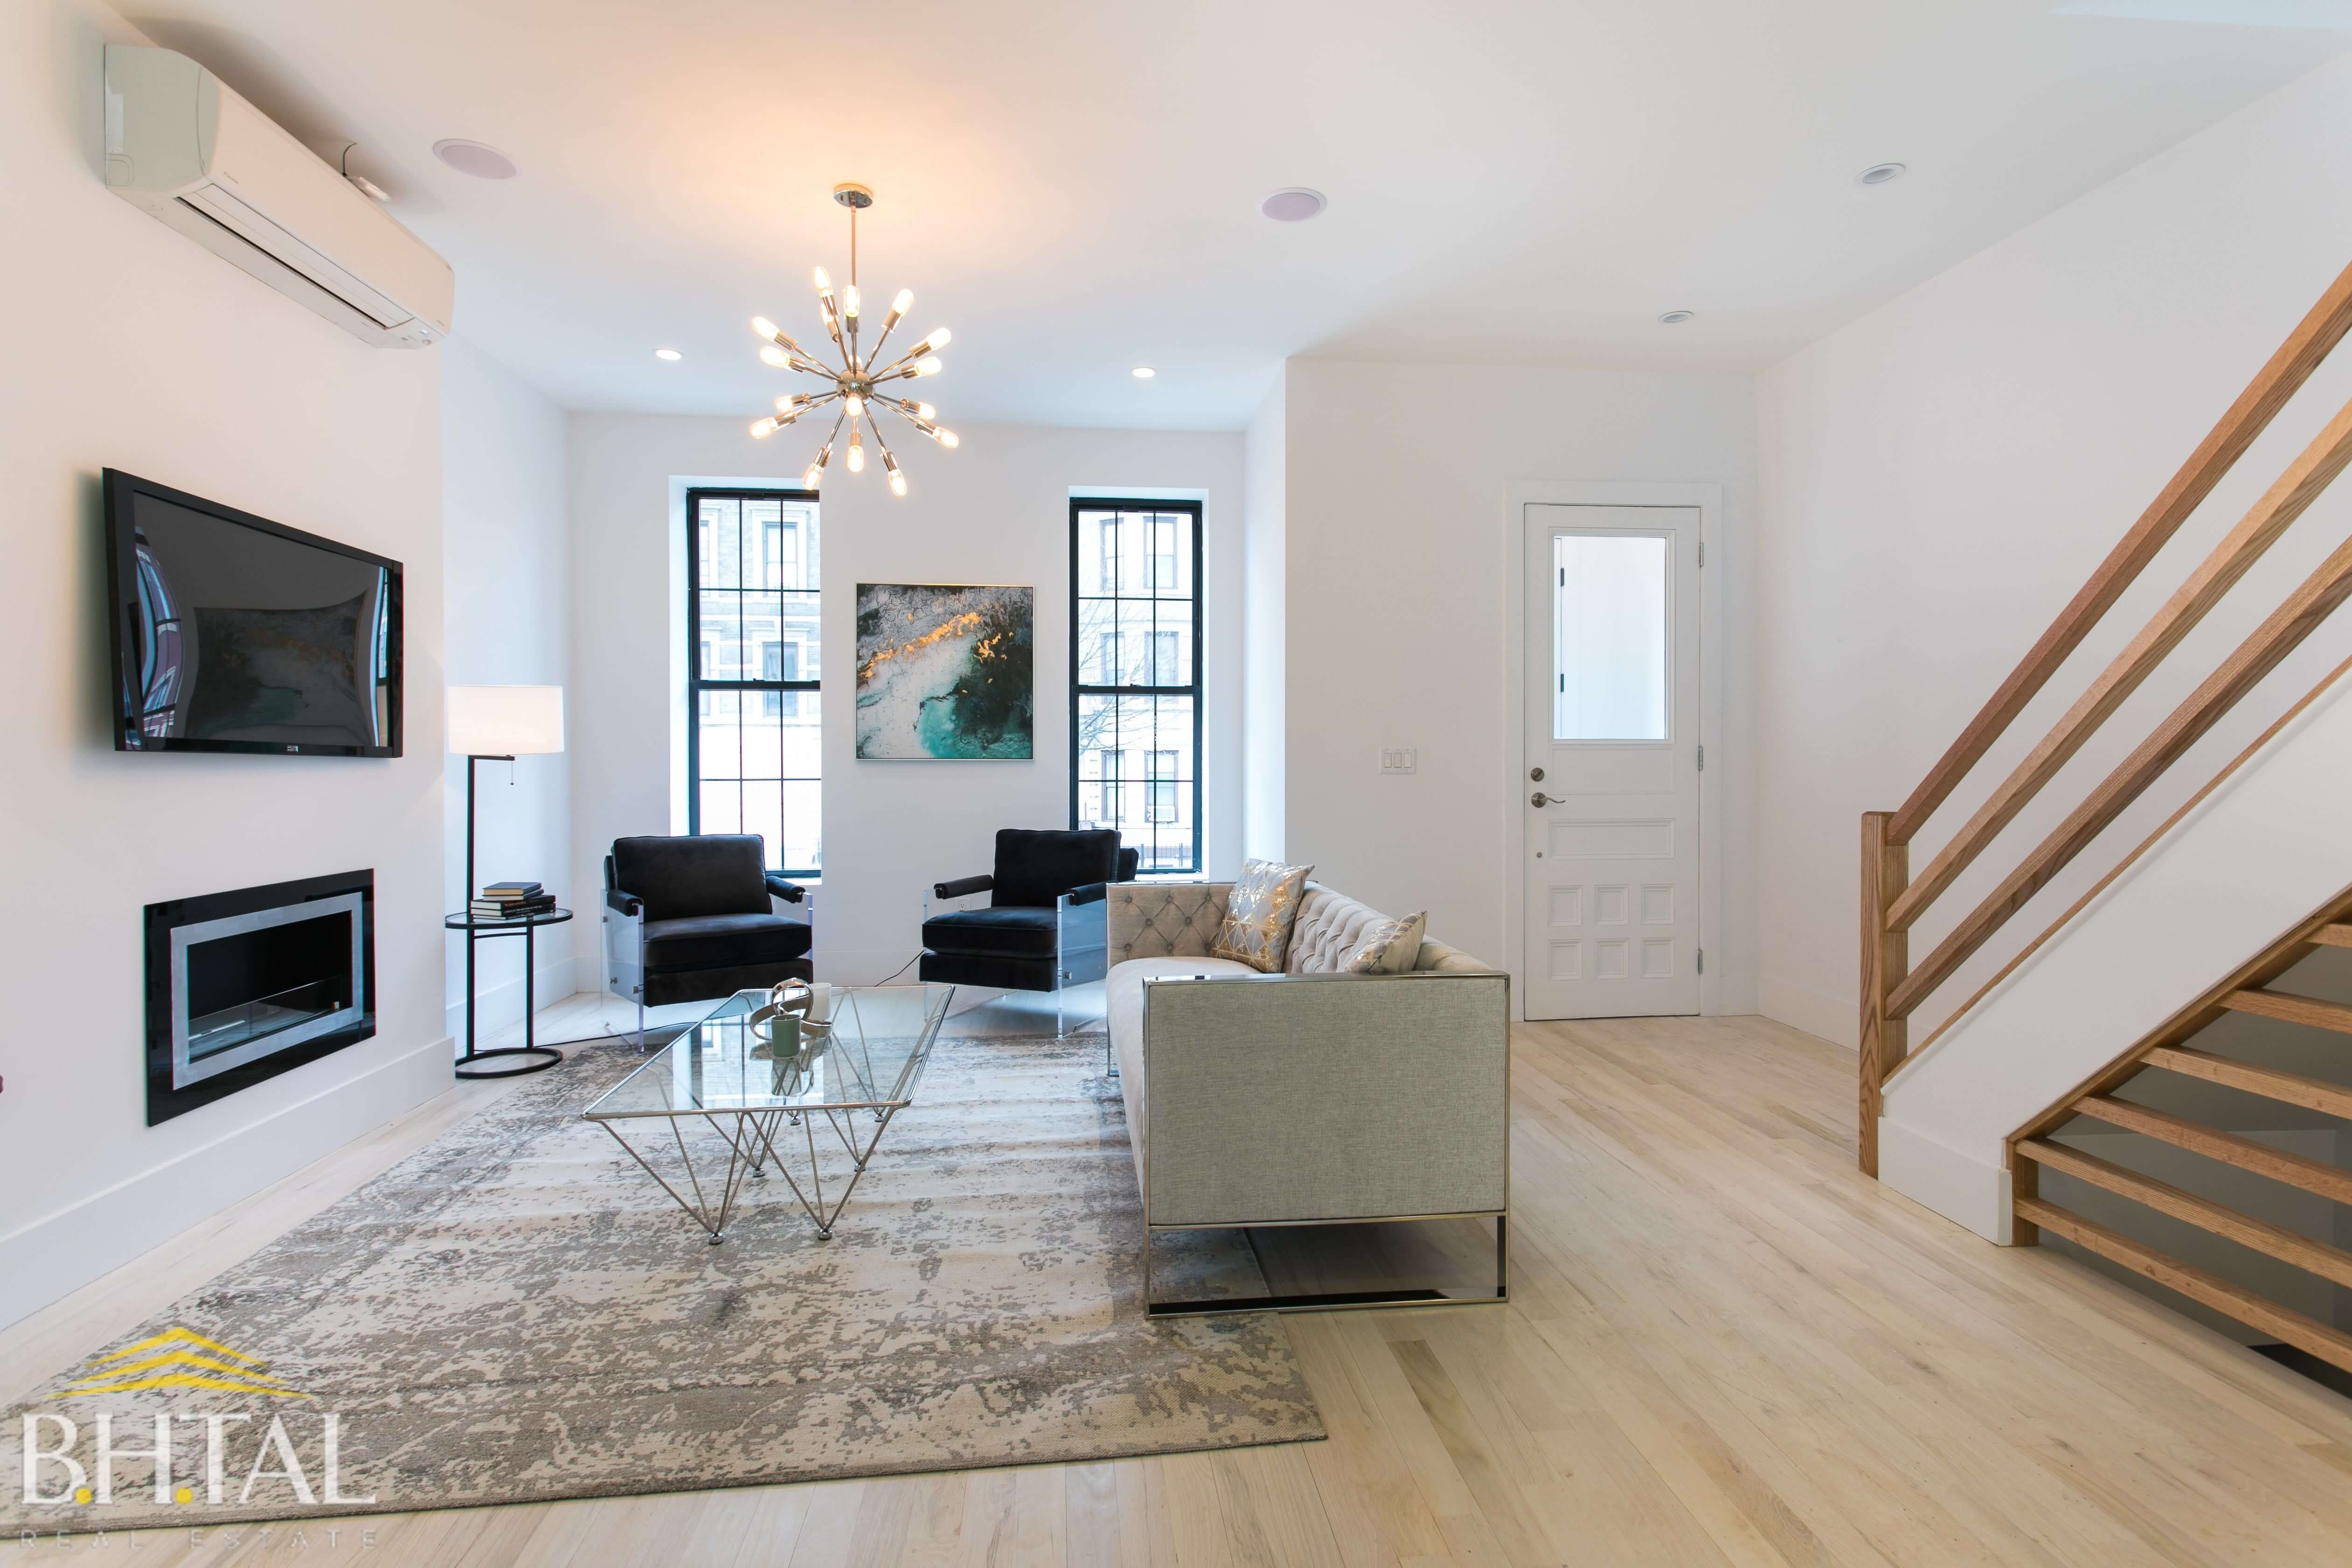 Brooklyn Homes for Sale in Clinton Hill, Bed Stuy, Prospect Lefferts Gardens, Crown Heights